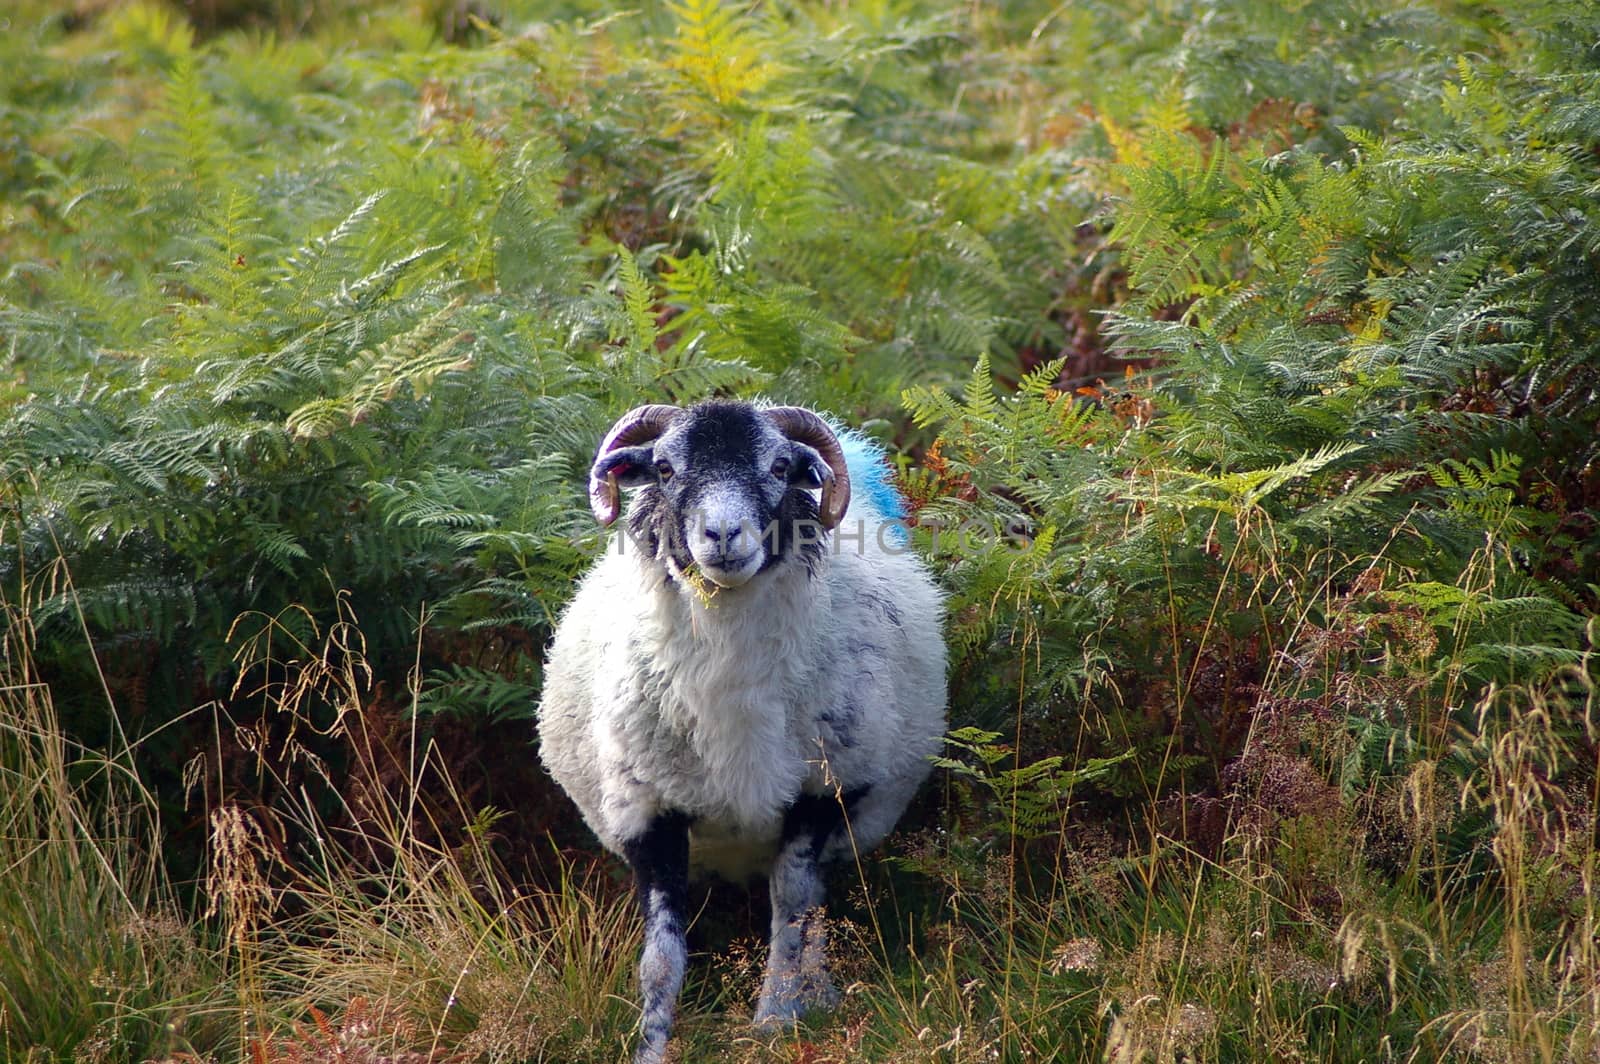 Sheep staring at me taking its picture amid the ferns by the side of a road in the Yorkshire Dales